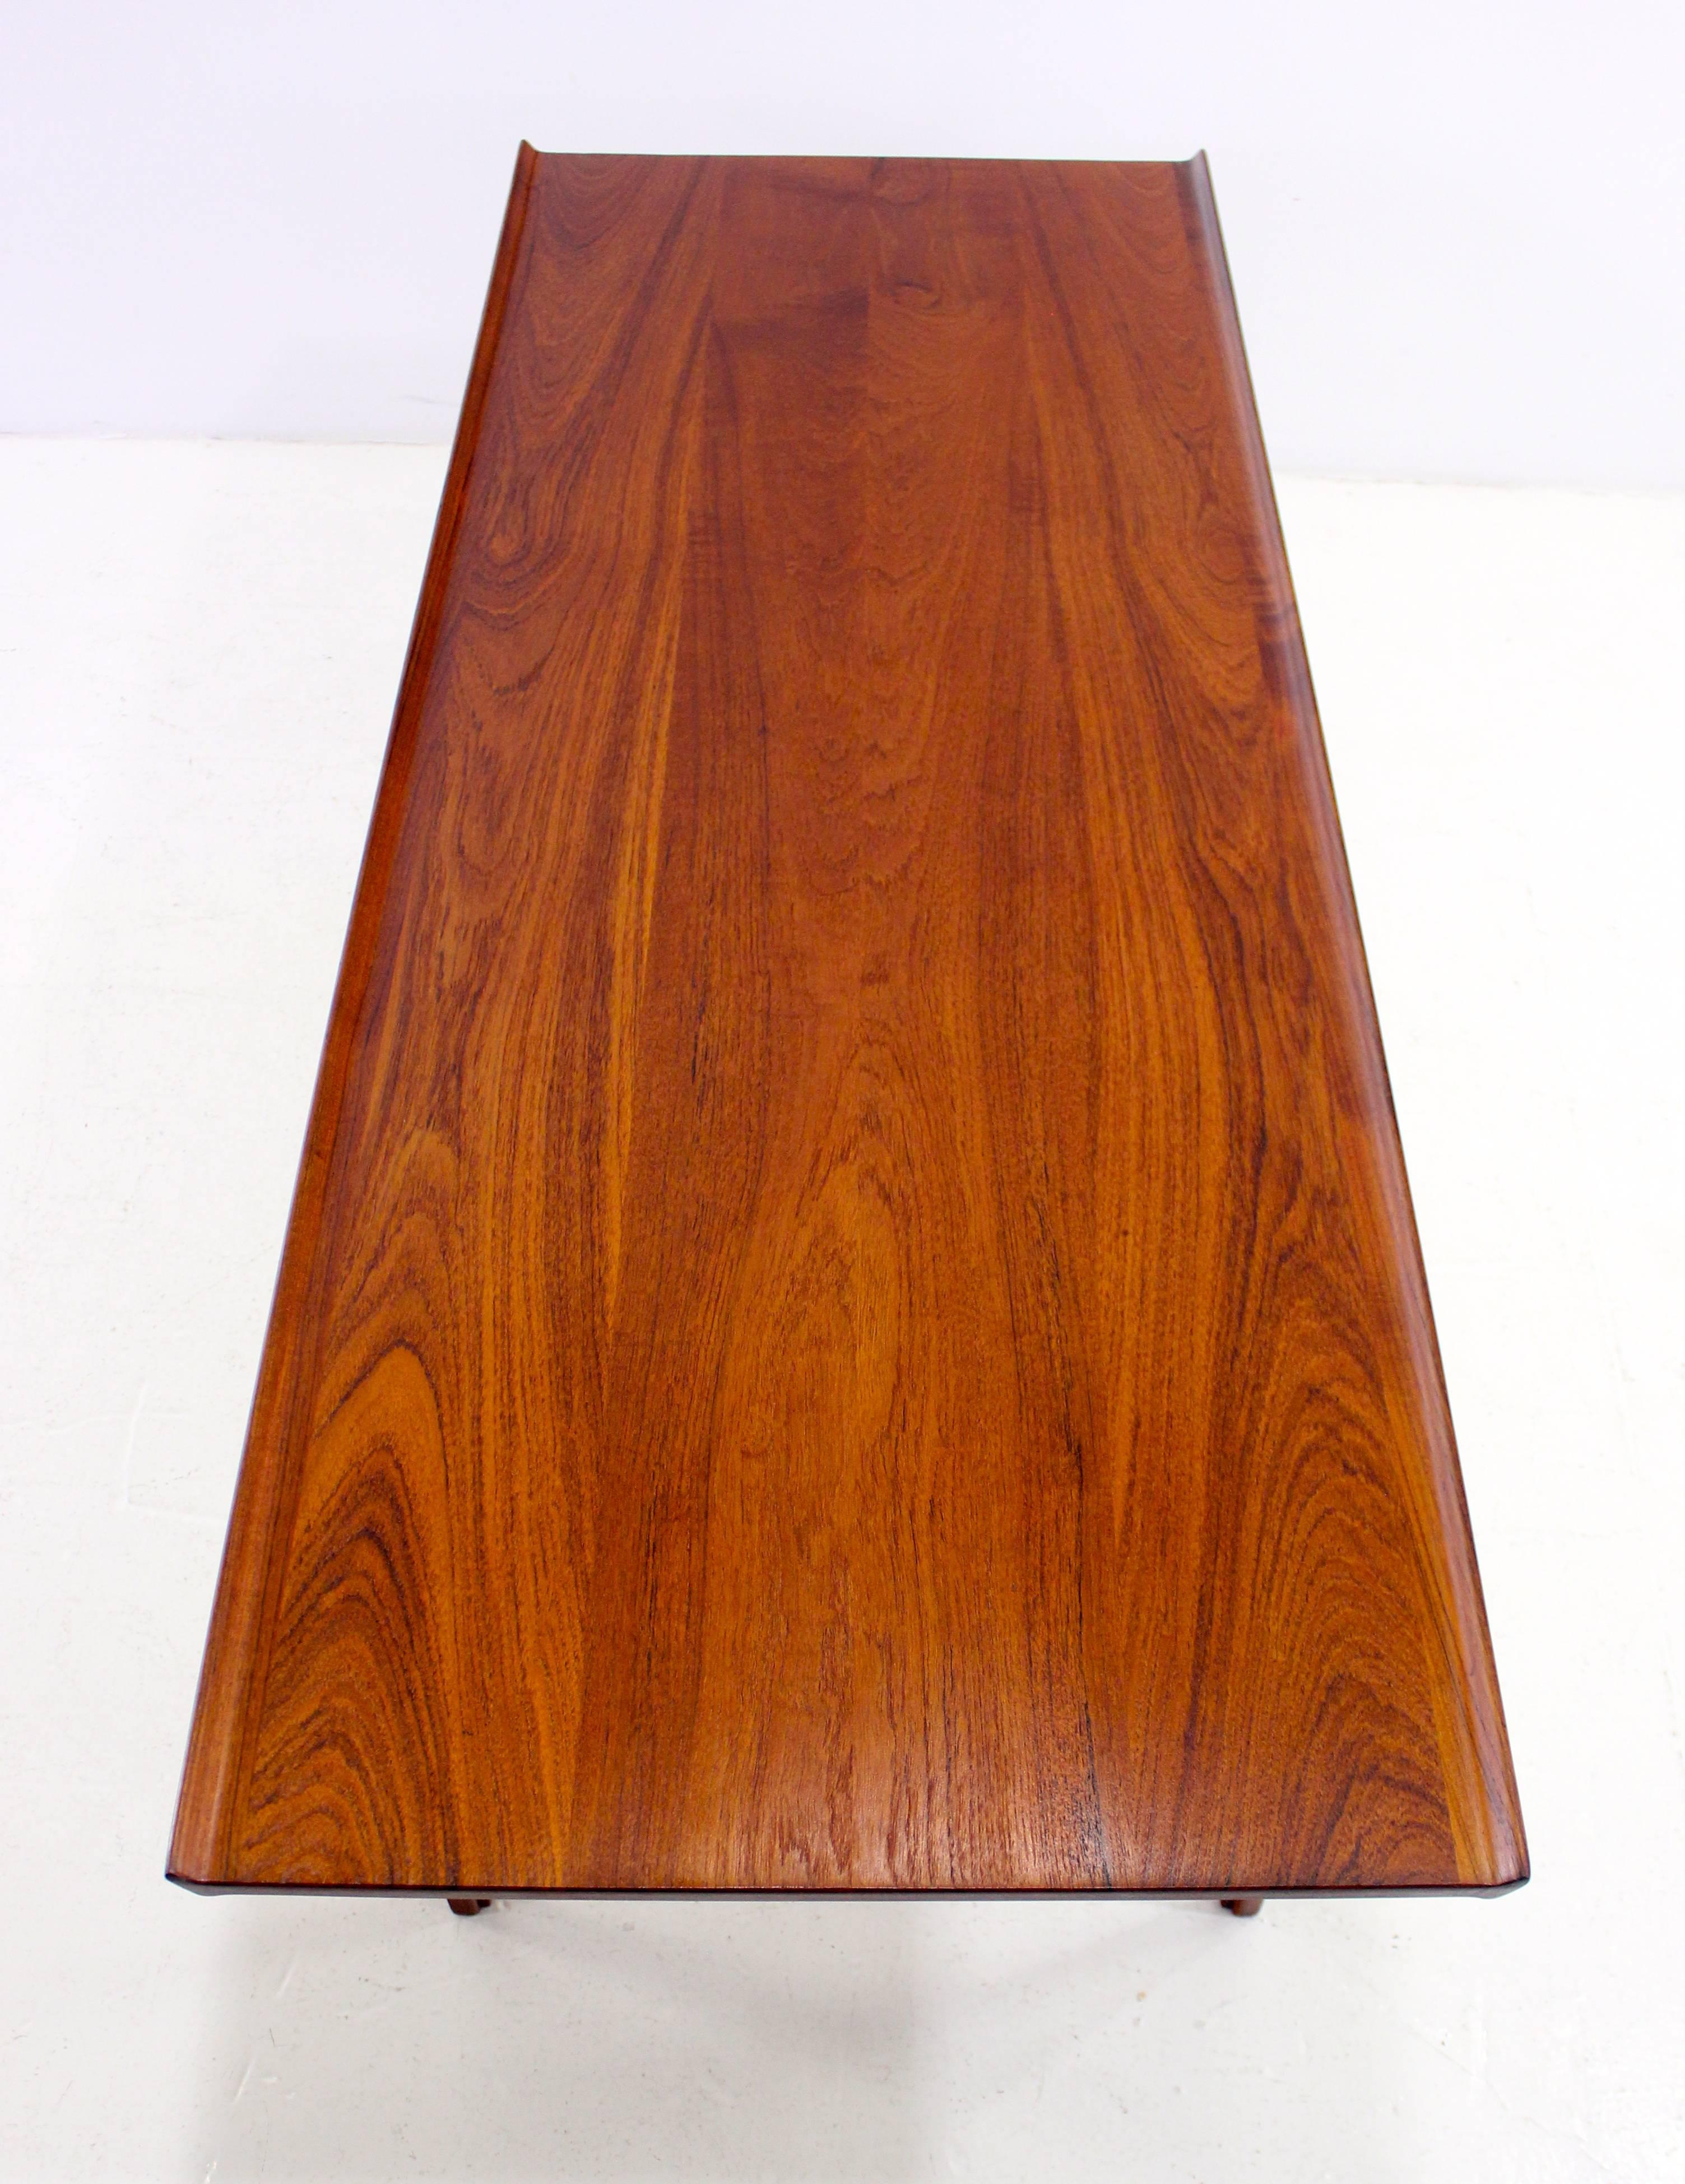 Danish Modern Solid Teak Three-Piece Table Set Designed by Finn Juhl In Excellent Condition For Sale In Portland, OR